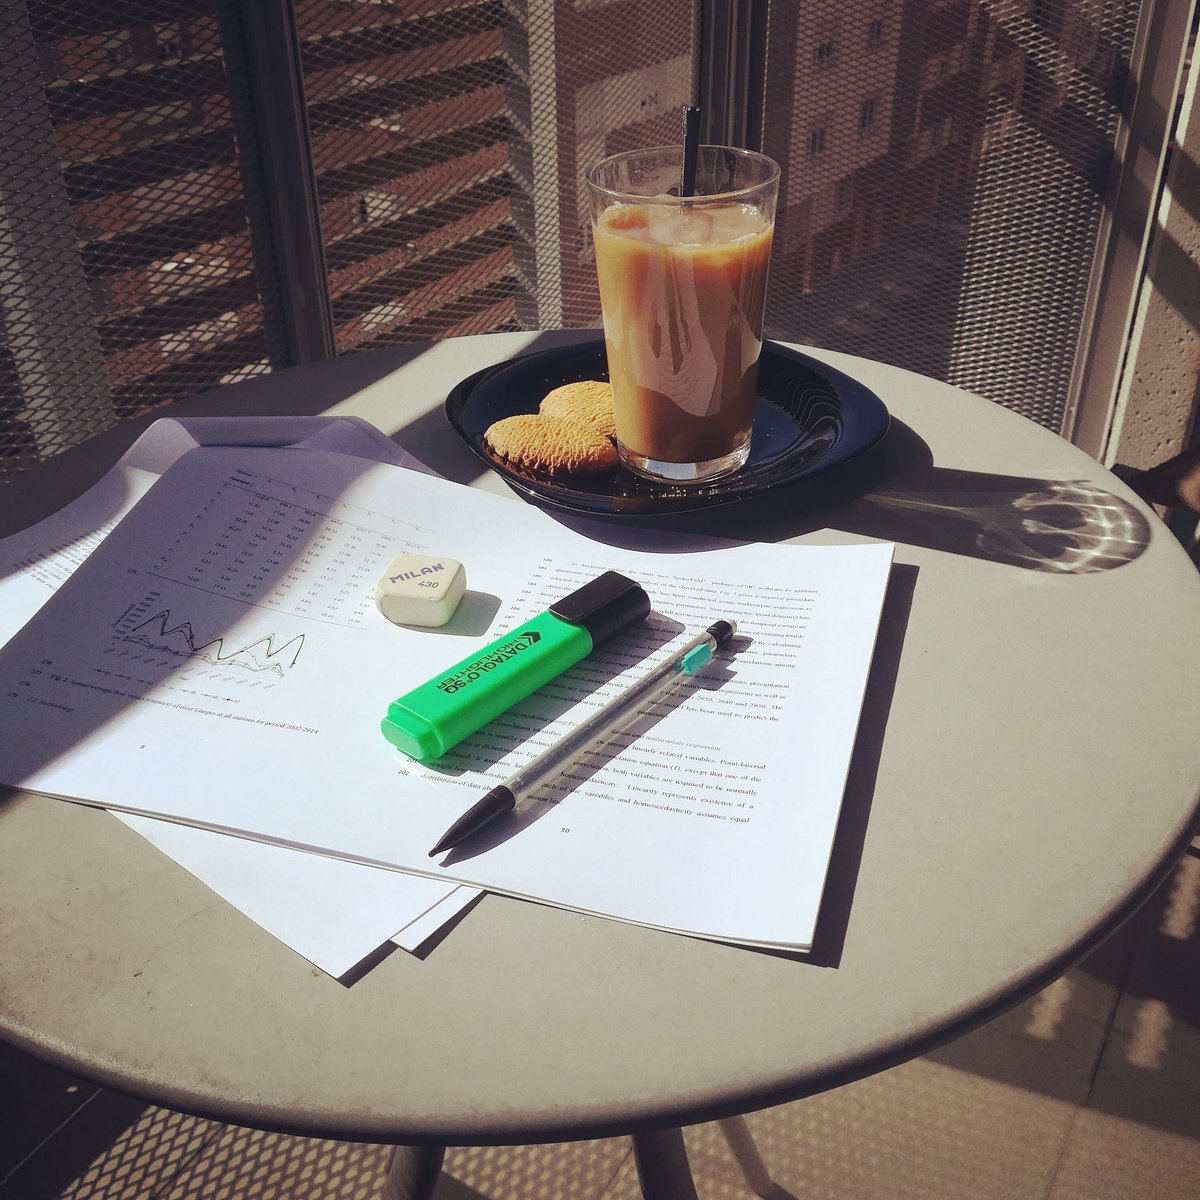 Reviewing a paper like this looks like a better task 📝😊
#Scientist #Terrace #Sun #Spain #Spring #Icecoffe #ScienceFluencer